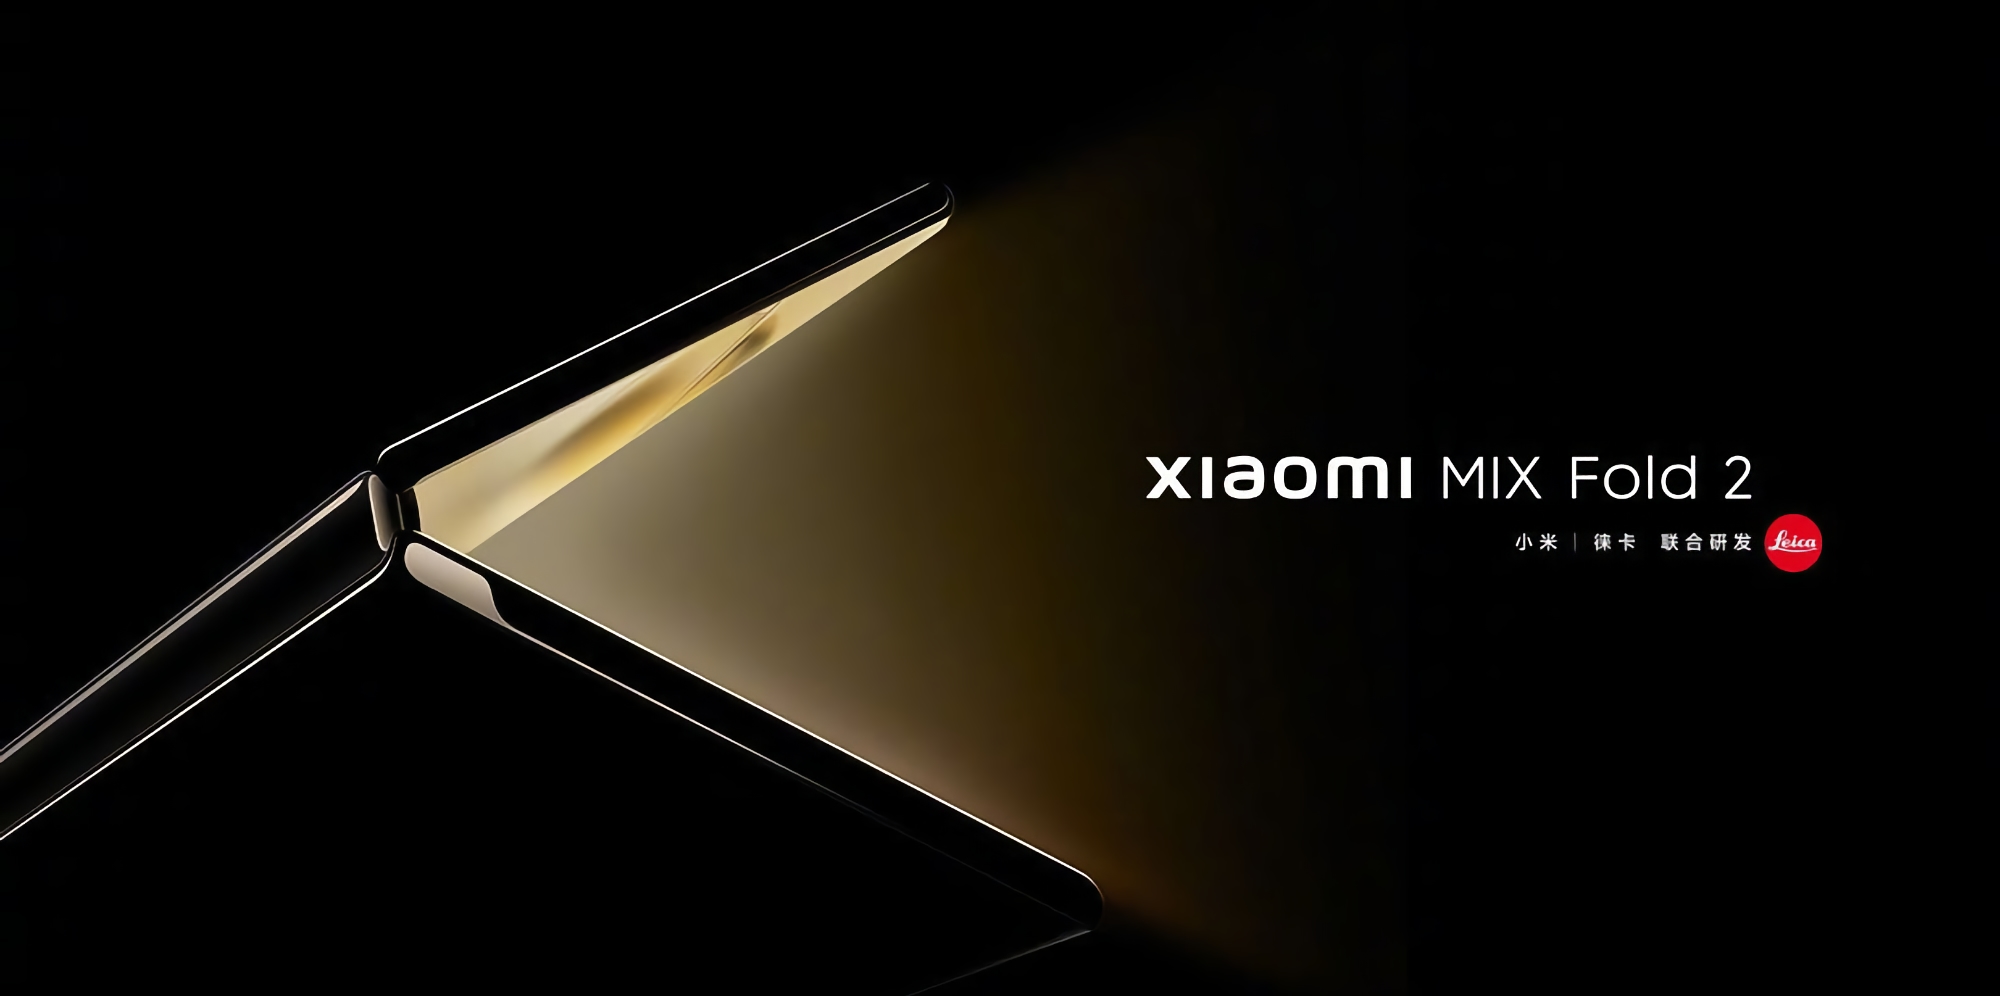 Xiaomi announced the presentation on August 11: Waiting for the folding smartphone Xiaomi MIX Fold 2, a tablet Xiaomi Pad 5 Pro 12.4 and TWS-headphones Xiaomi Buds 4 Pro